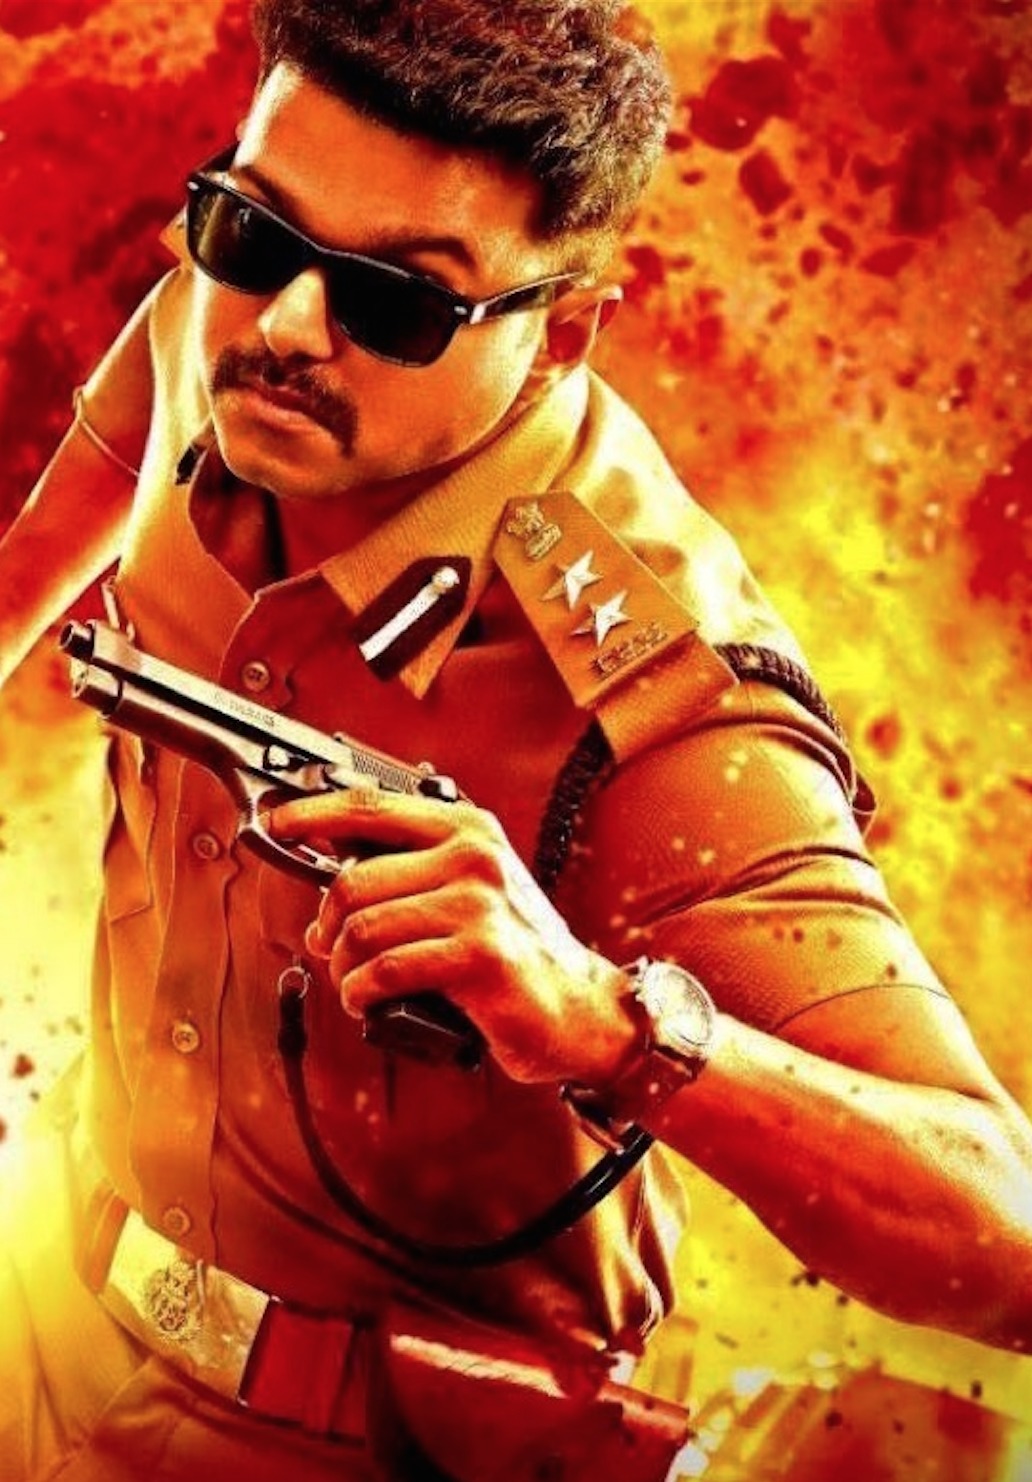 Theri Movie photos,images,pics,stills and picture - 15213 # 0 ...